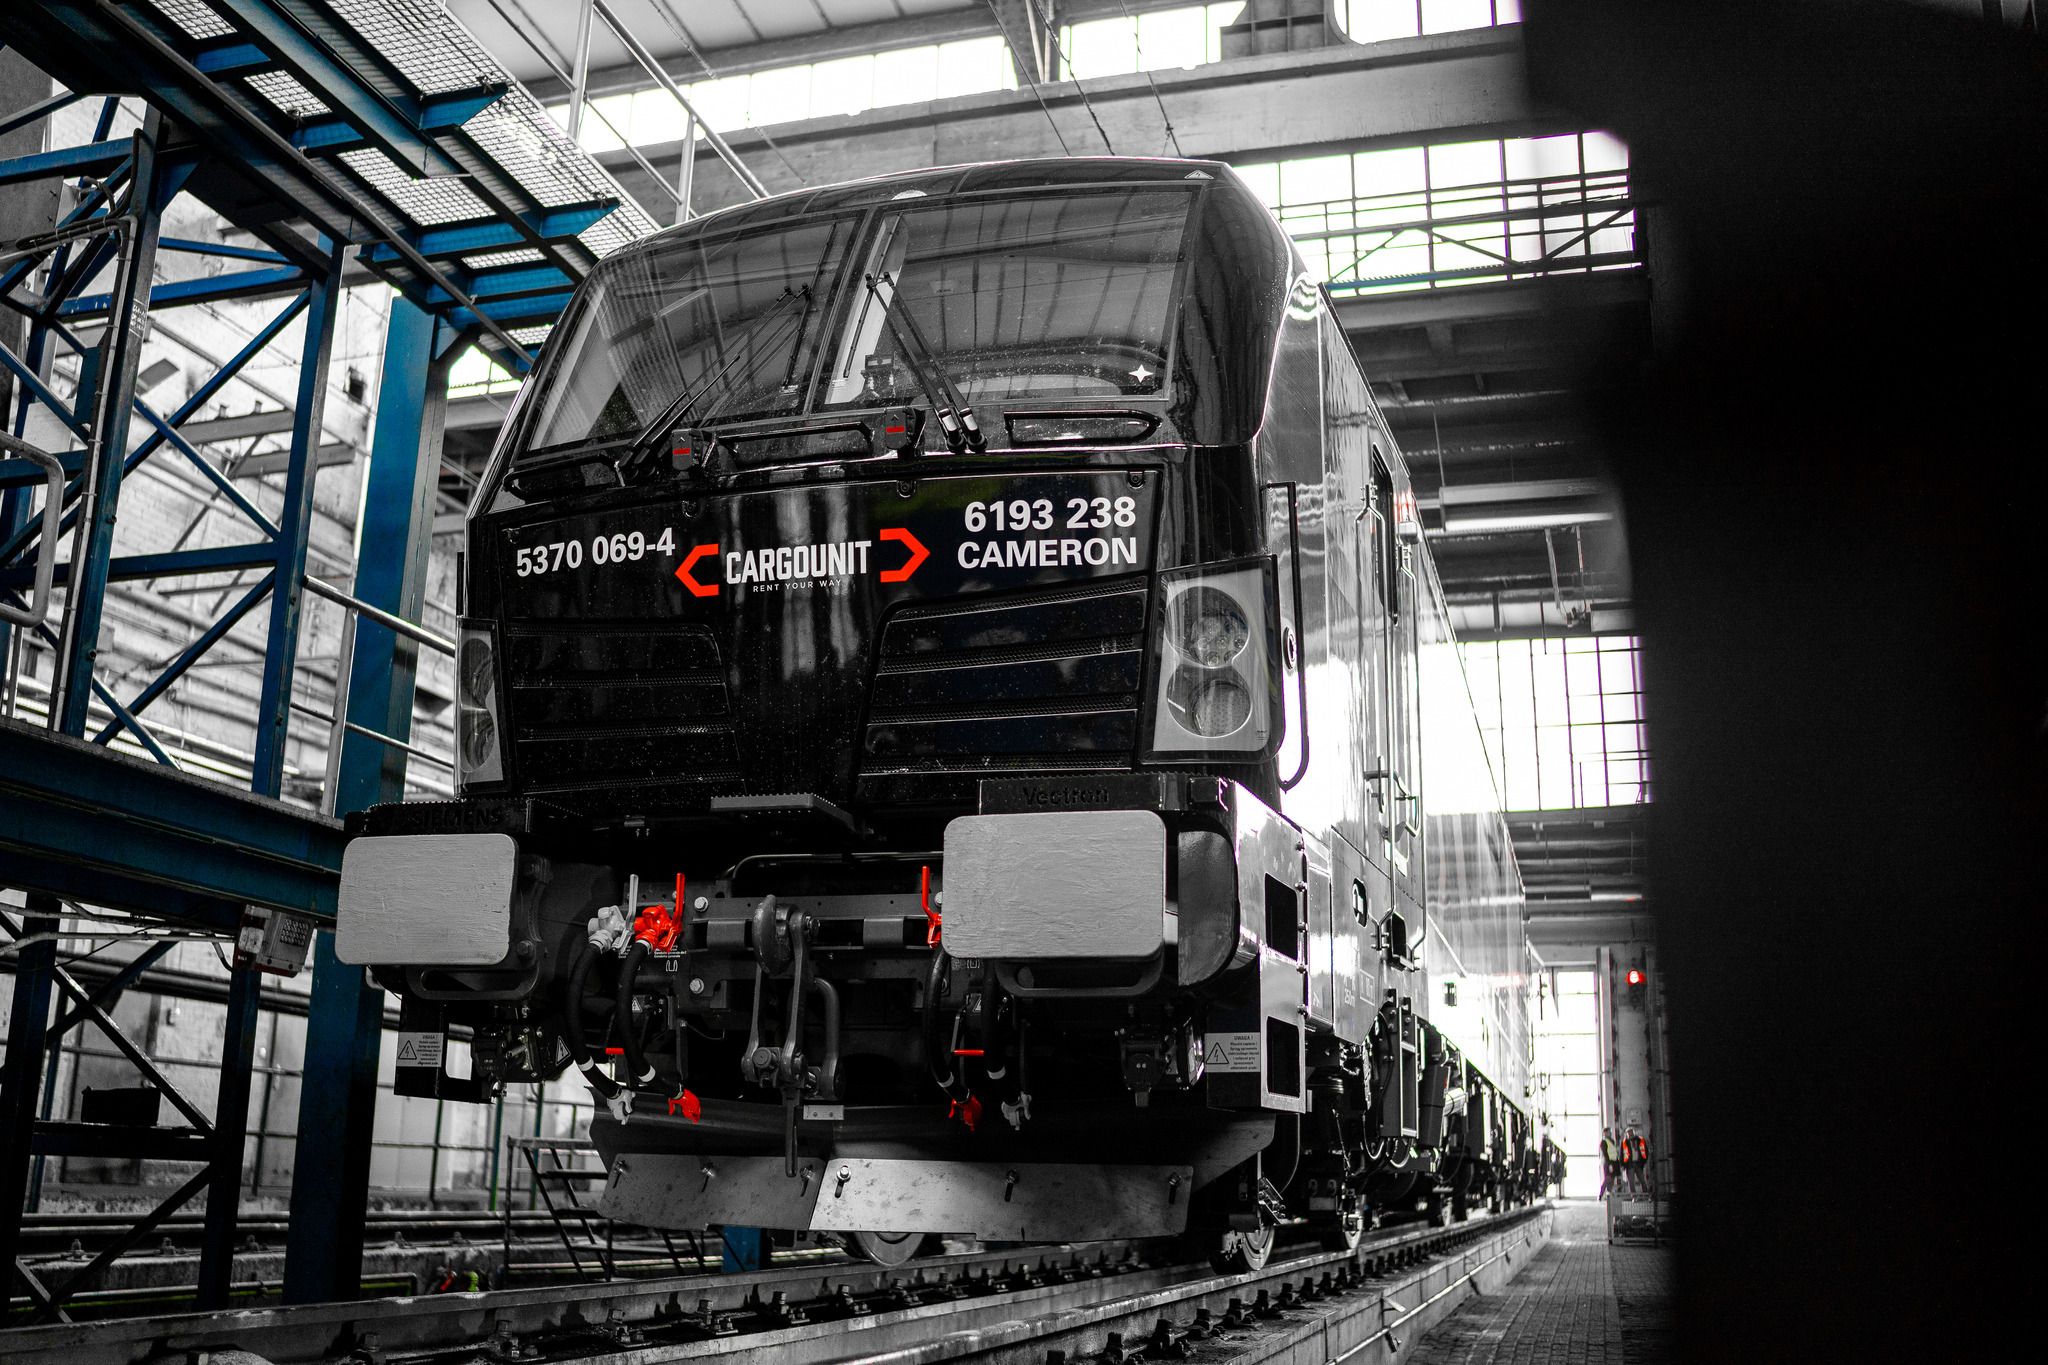 The Siemens Mobility Vectron electric locomotive for Cargounit